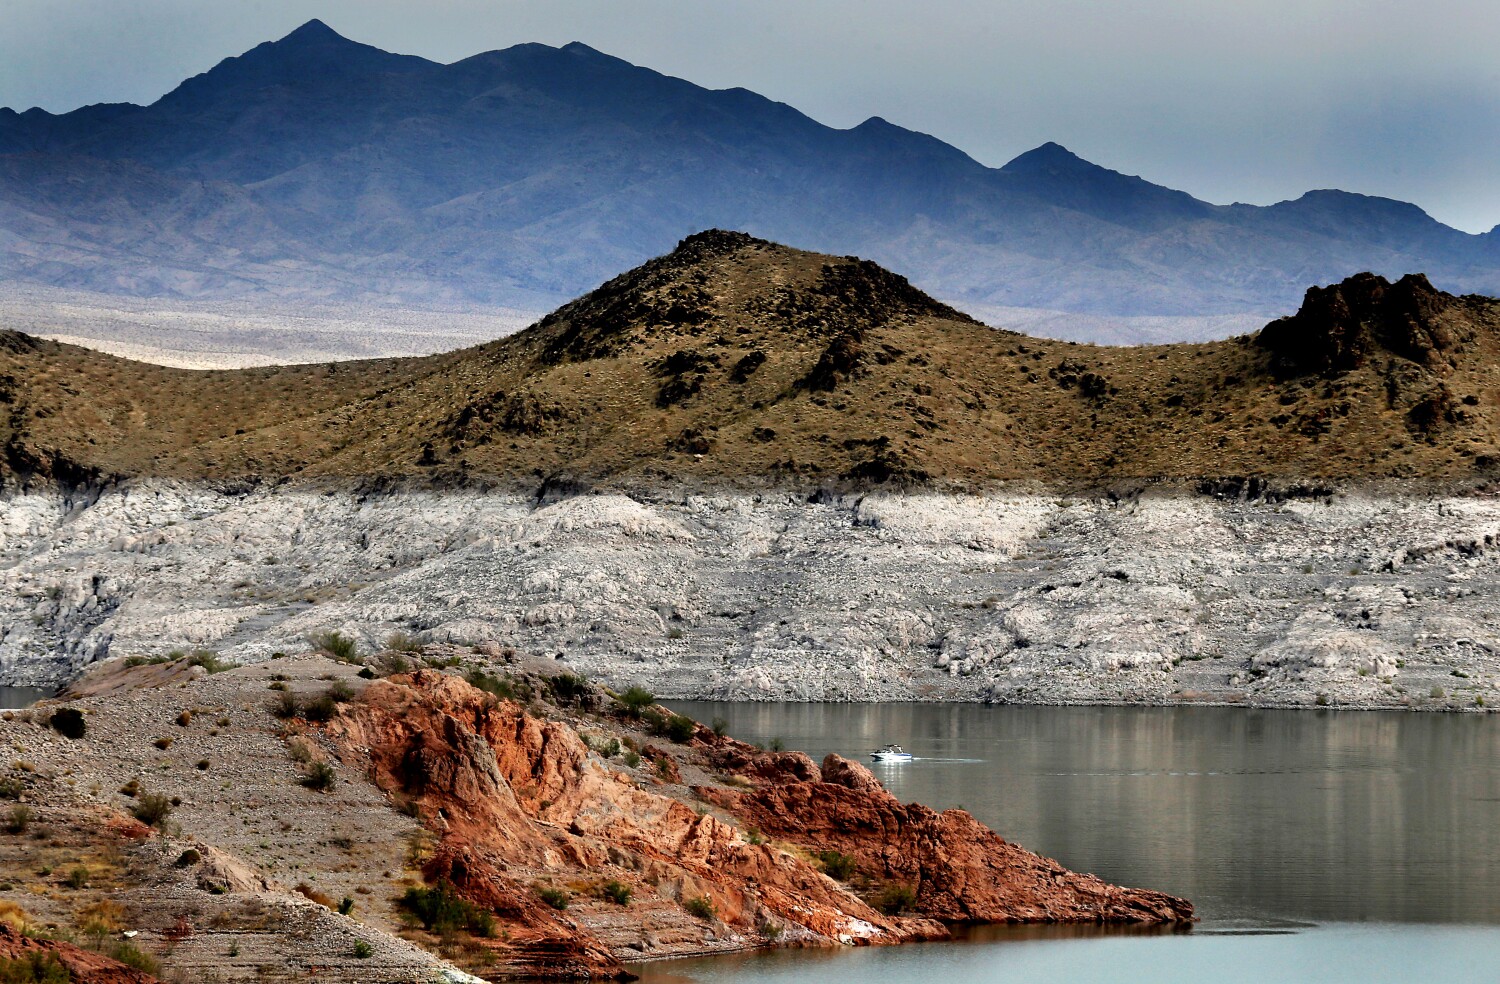 Drought reveals human remains in barrel at Lake Mead